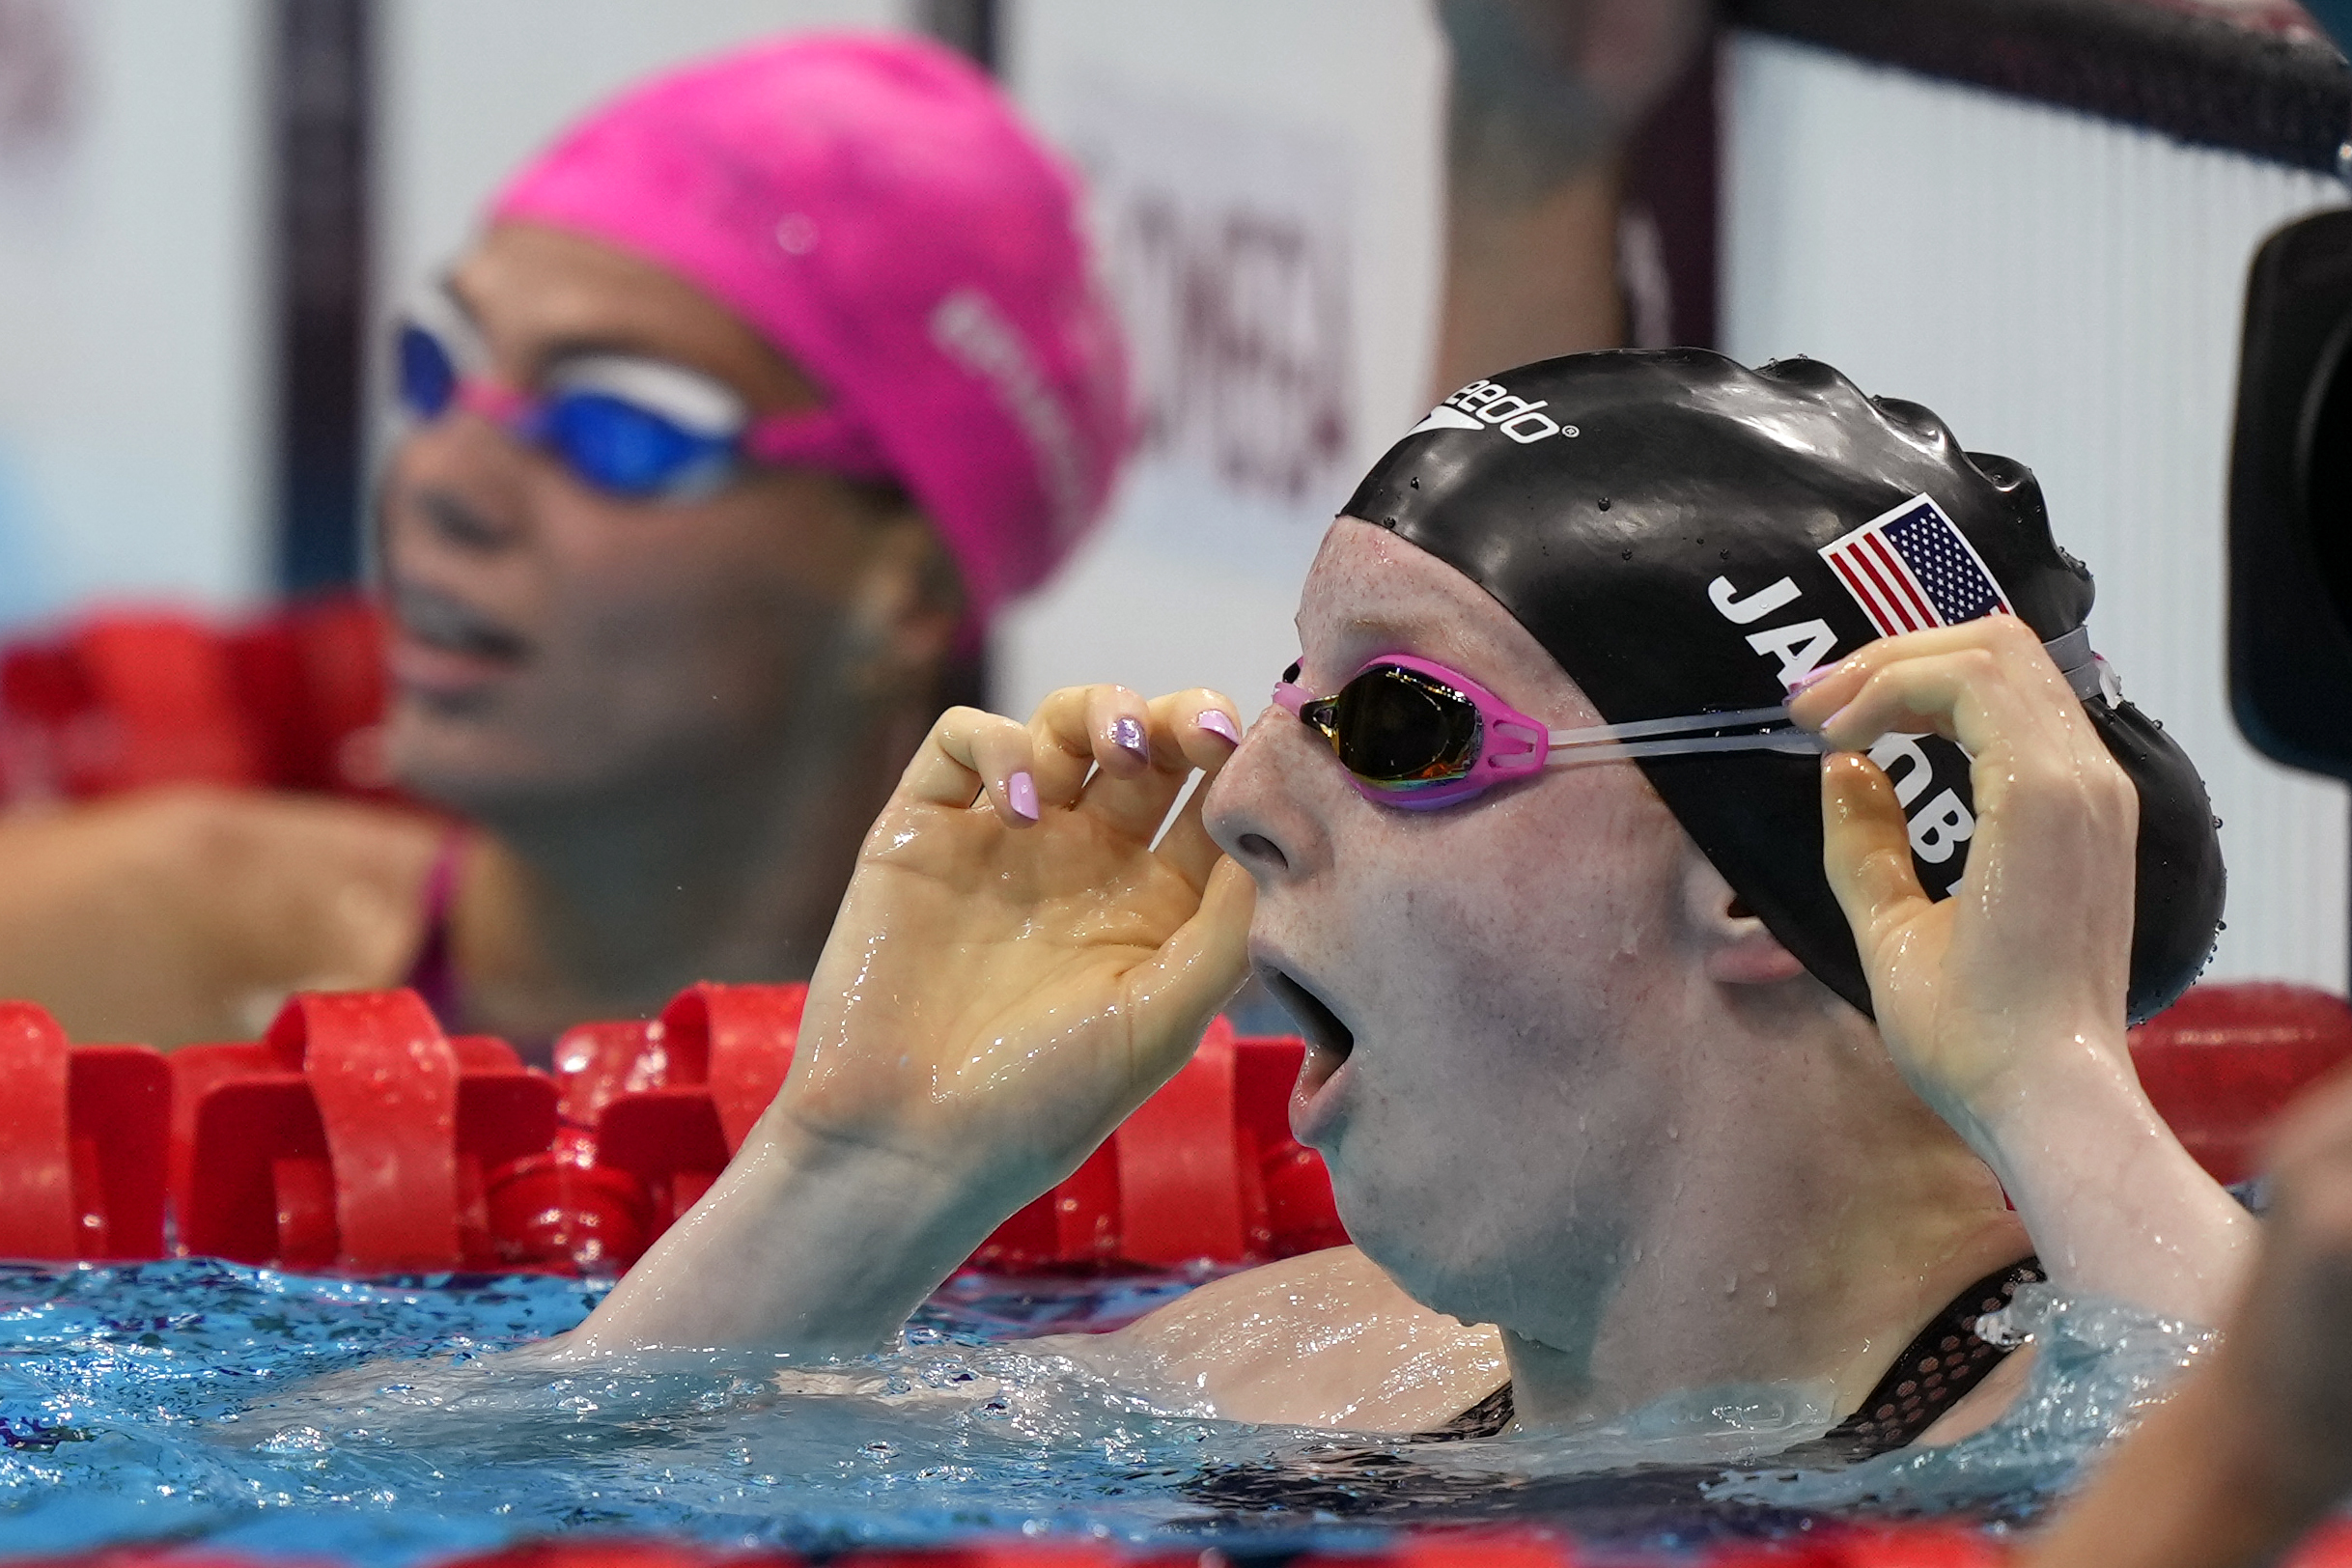 Lydia Jacoby of the United States reacting at seeing the results after winning the final of the women’s 100-meter breaststroke at the 2020 Summer Olympics in Tokyo.